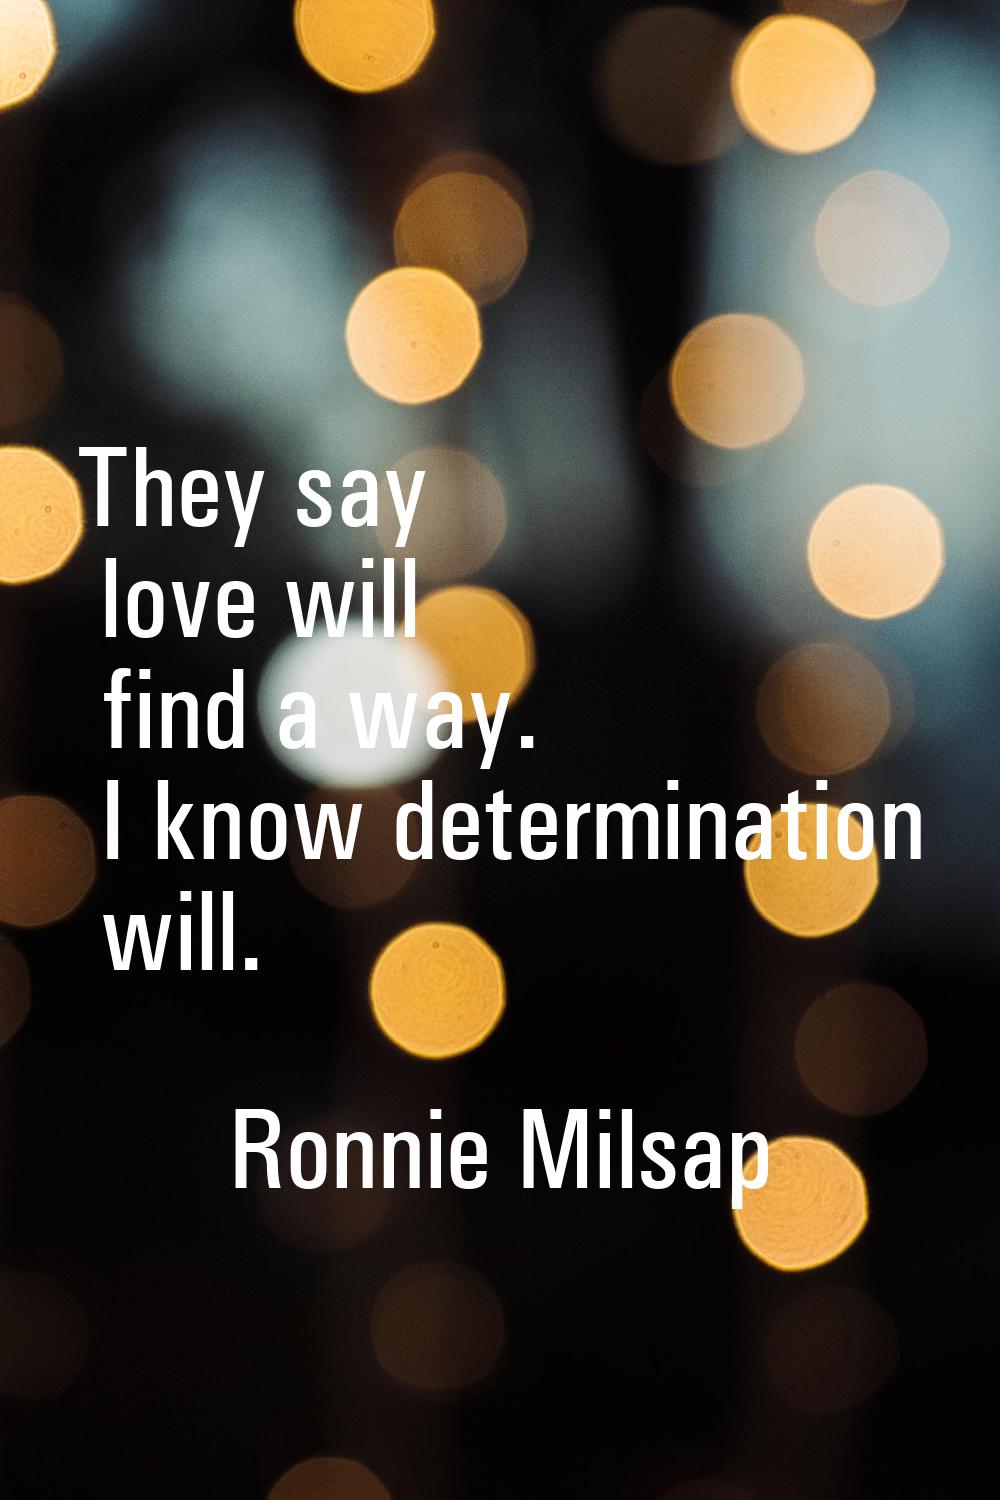 They say love will find a way. I know determination will.